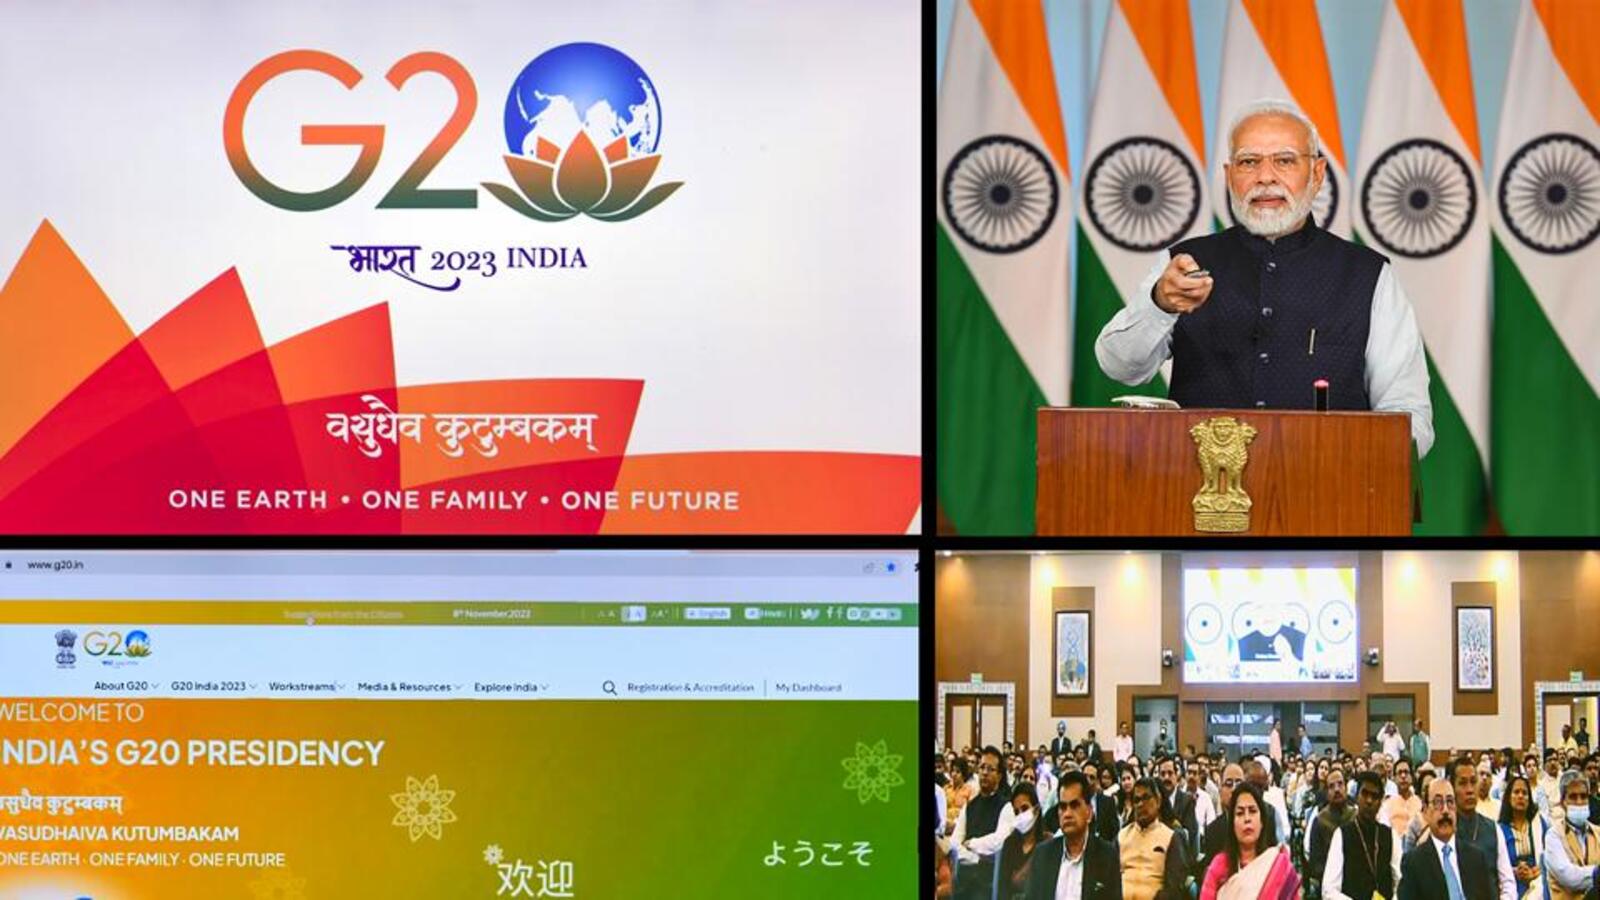 Pm Unveils Logo Of India’s G20 Presidency Explains What It Means To The World Latest News